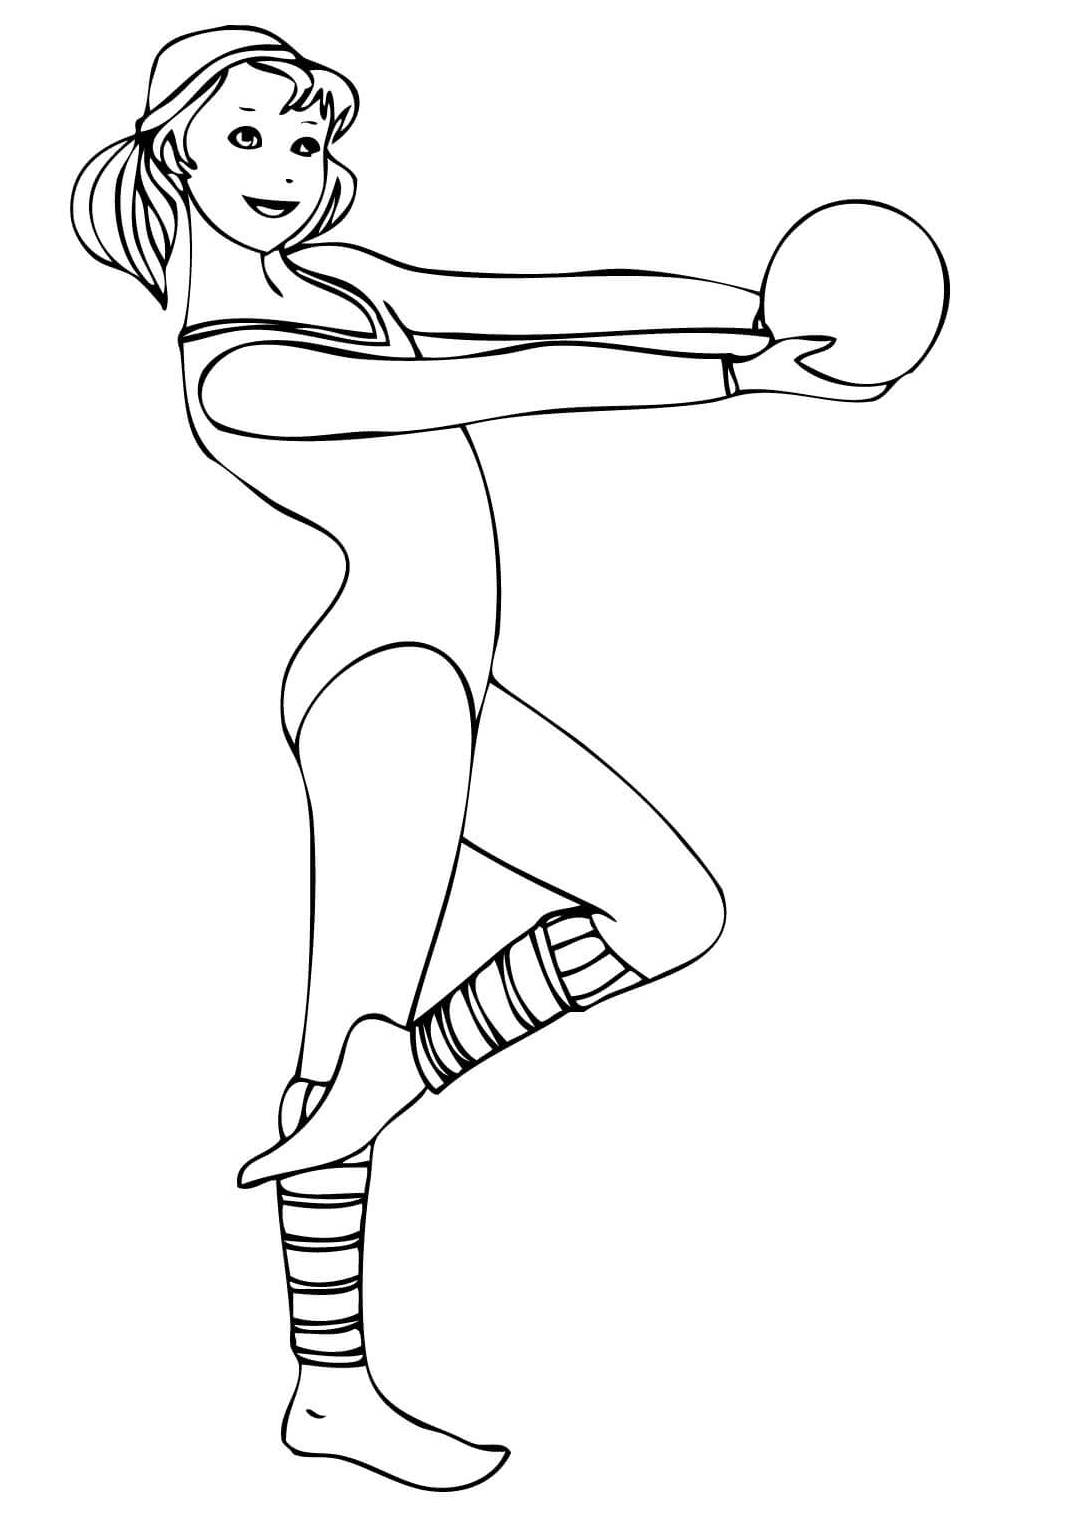 Rhythmic Gymnastics Exercises with Ball Coloring Pages